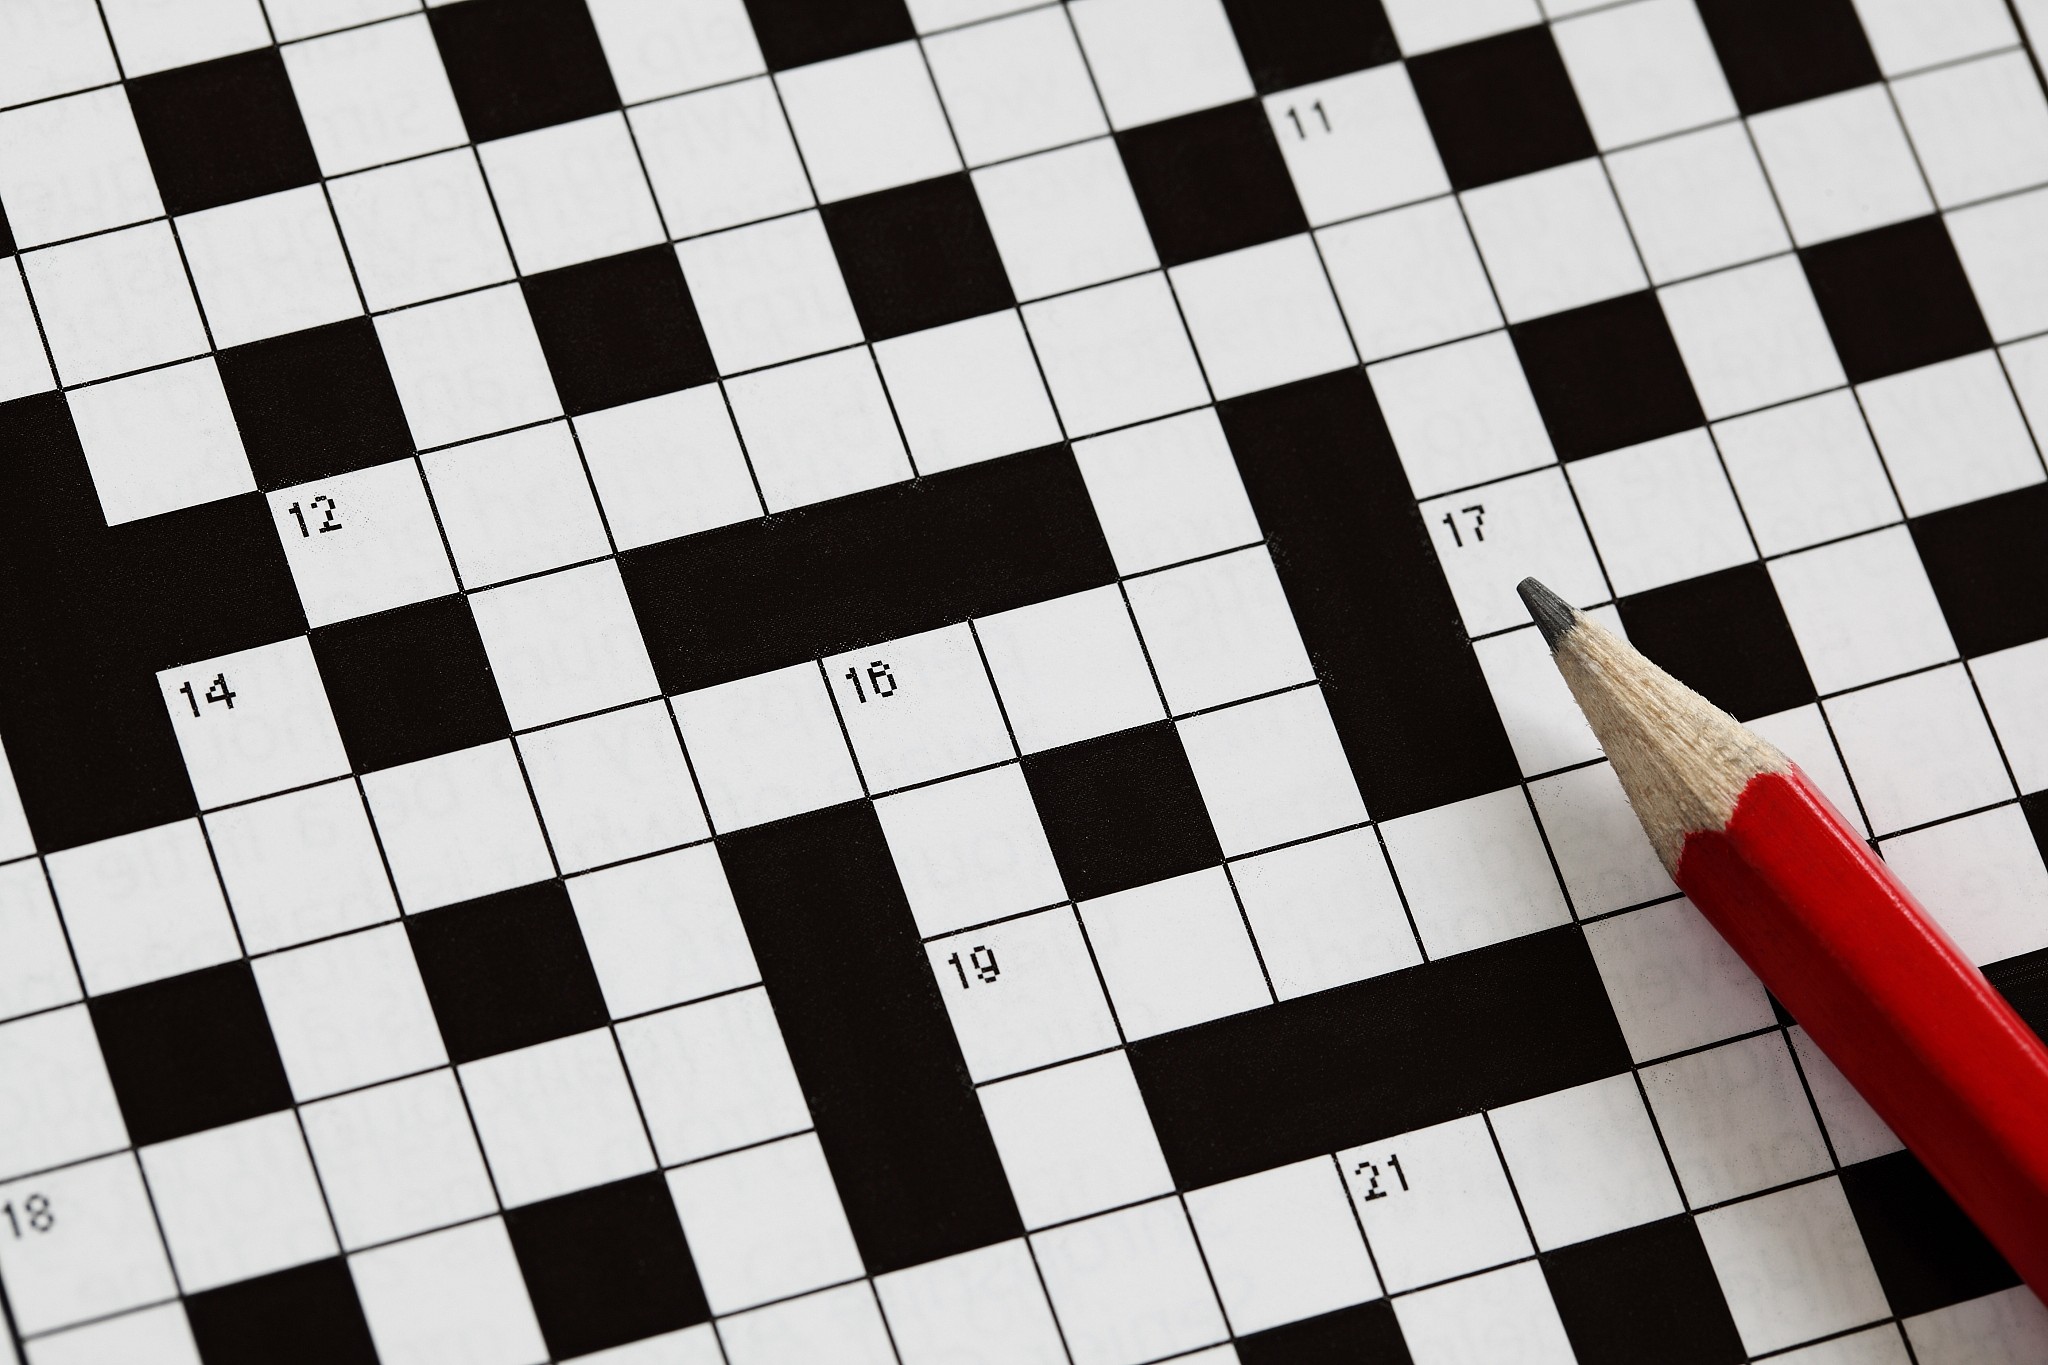 Word nerds unite: A crossword and language festival is hitting